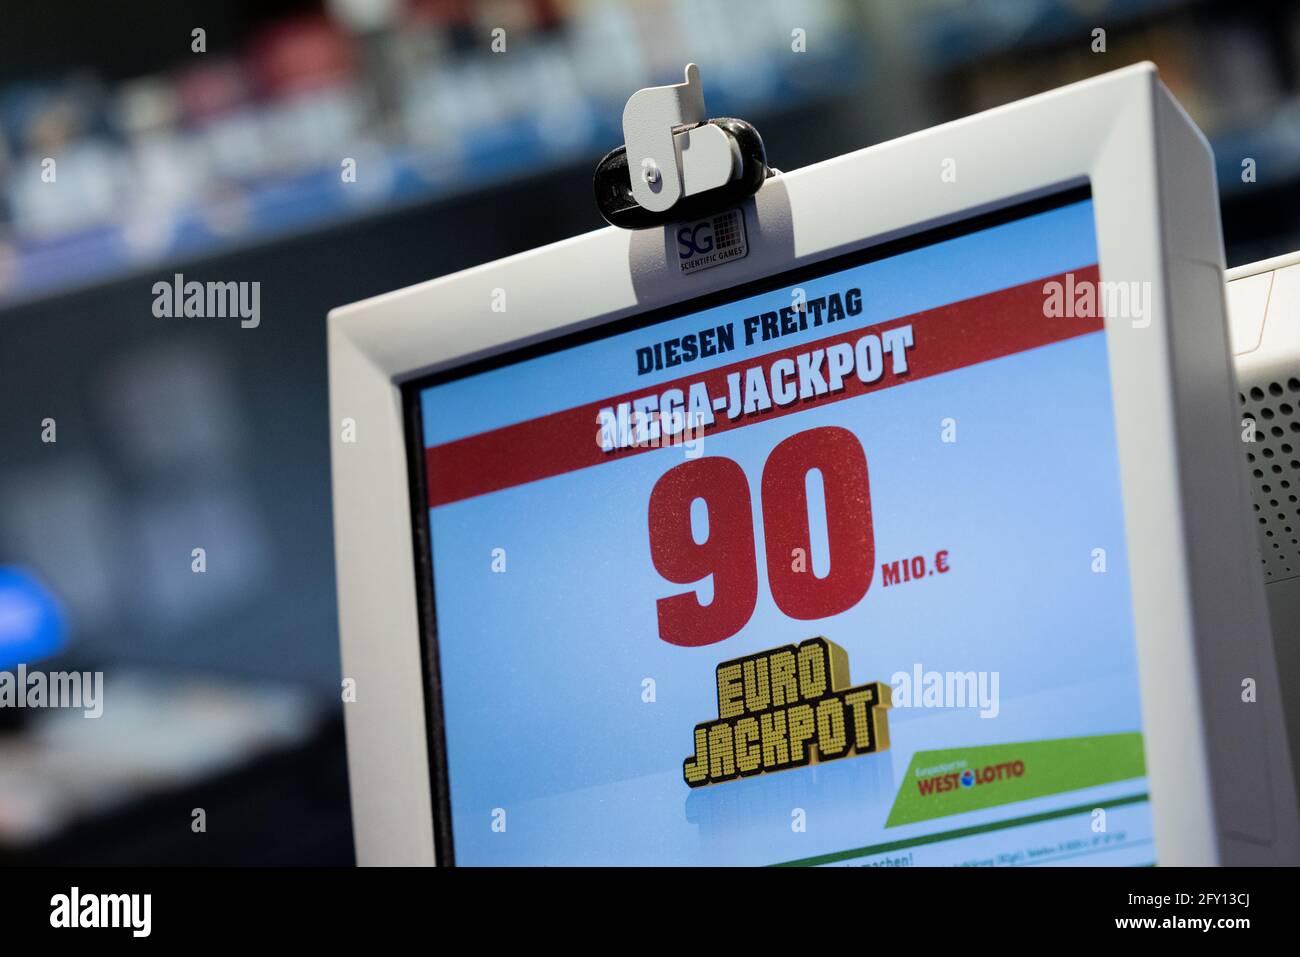 Cologne, Germany. 27th May, 2021. The Euro Jackpot of ·90 million can be  seen on a monitor. The Mega Jackpot has built up over six draws. Therefore,  the maximum is to be